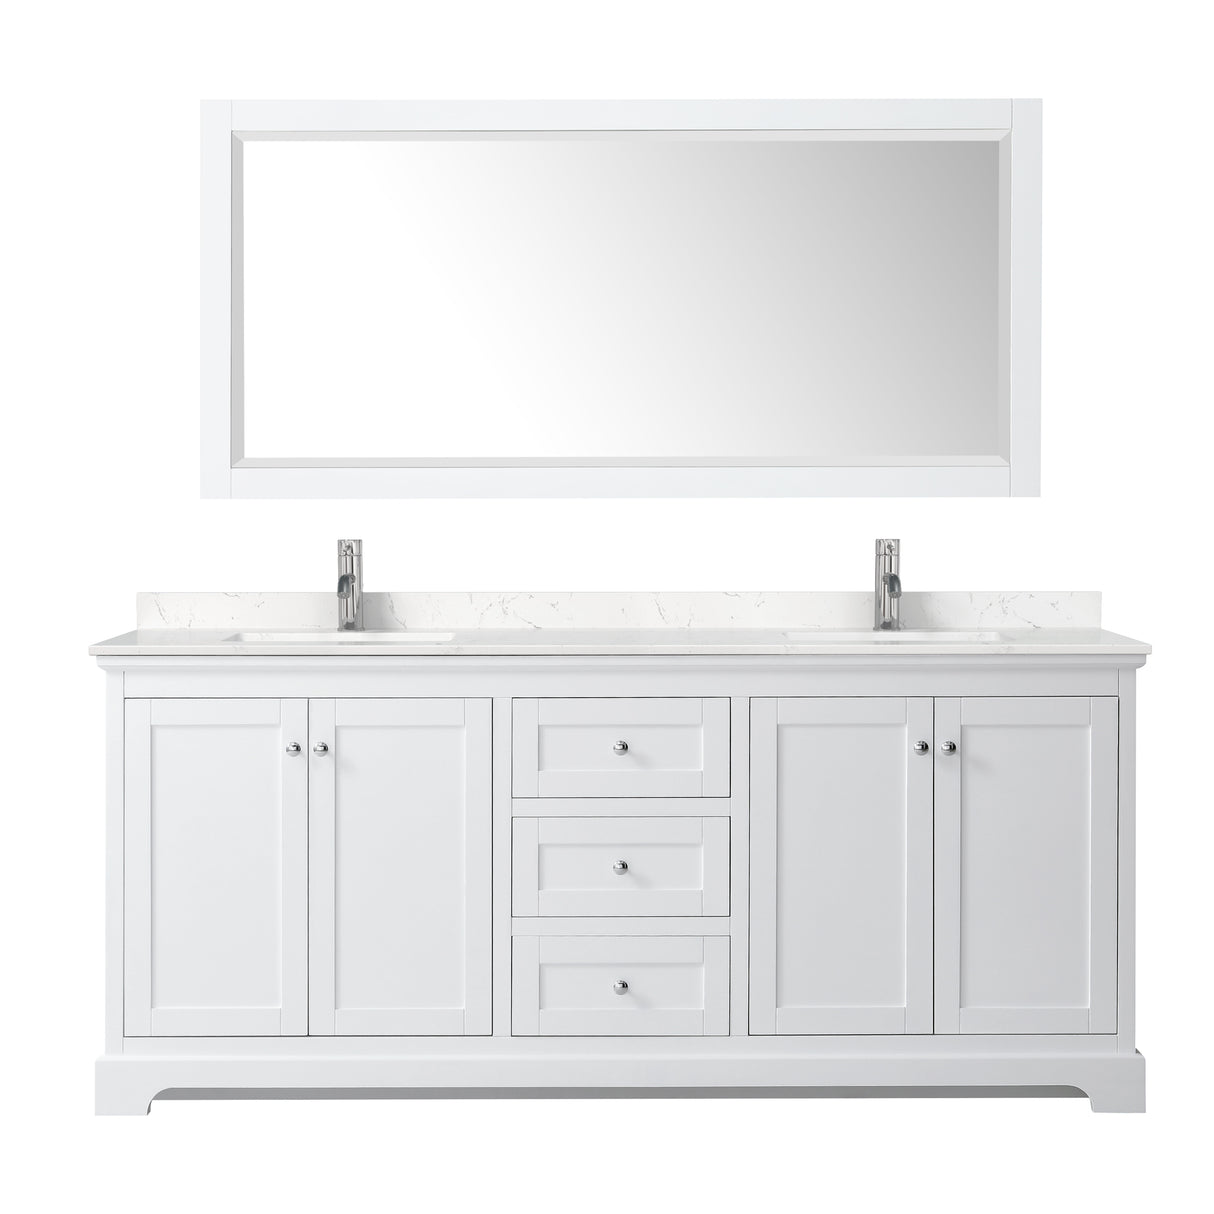 Avery 80 Inch Double Bathroom Vanity in White Carrara Cultured Marble Countertop Undermount Square Sinks 70 Inch Mirror